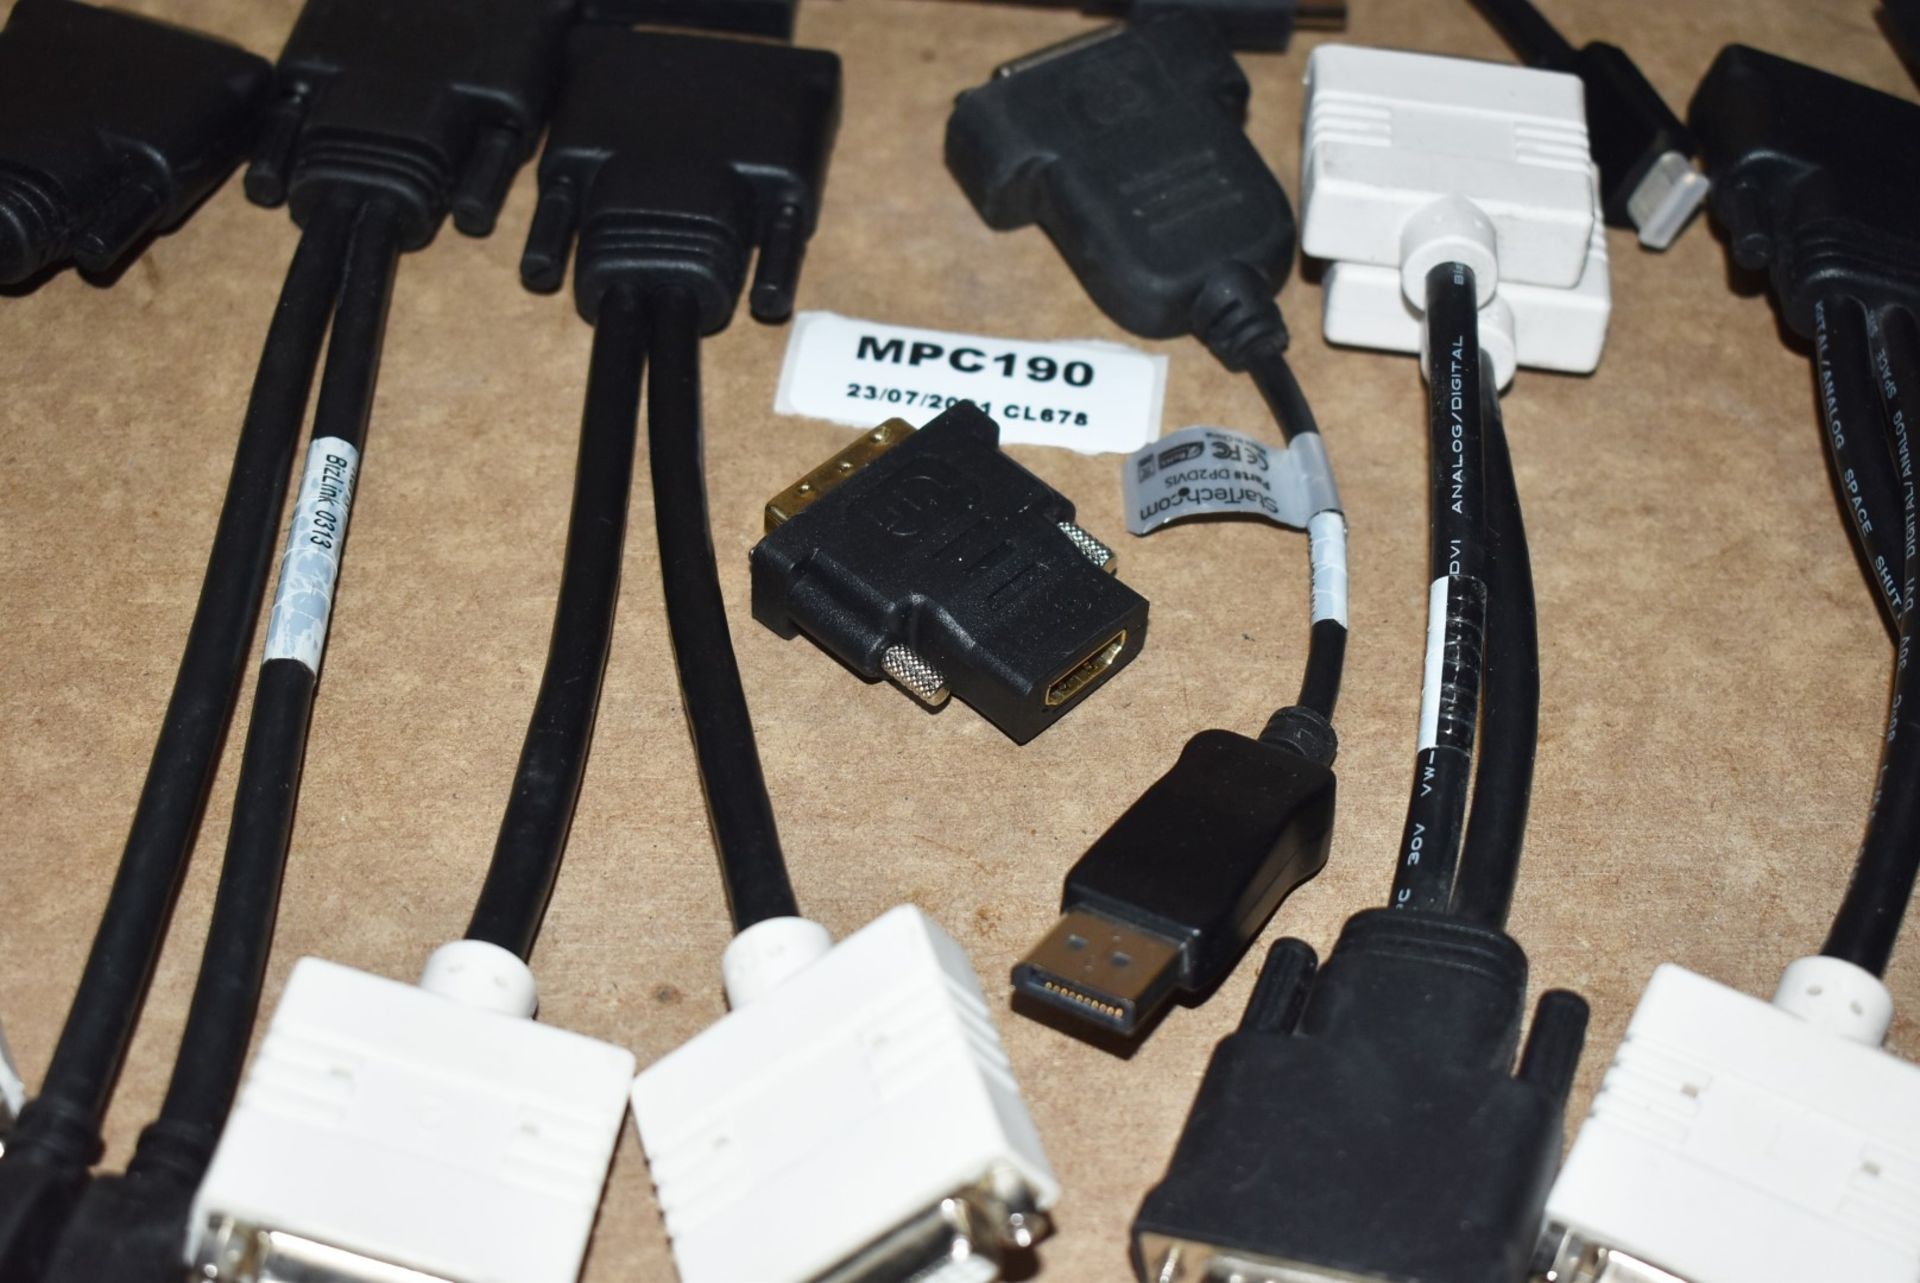 17 x Assorted Monitor Connector Cables - Ref: MPC190 P1 - CL678 - Location: Altrincham WA14This - Image 3 of 11